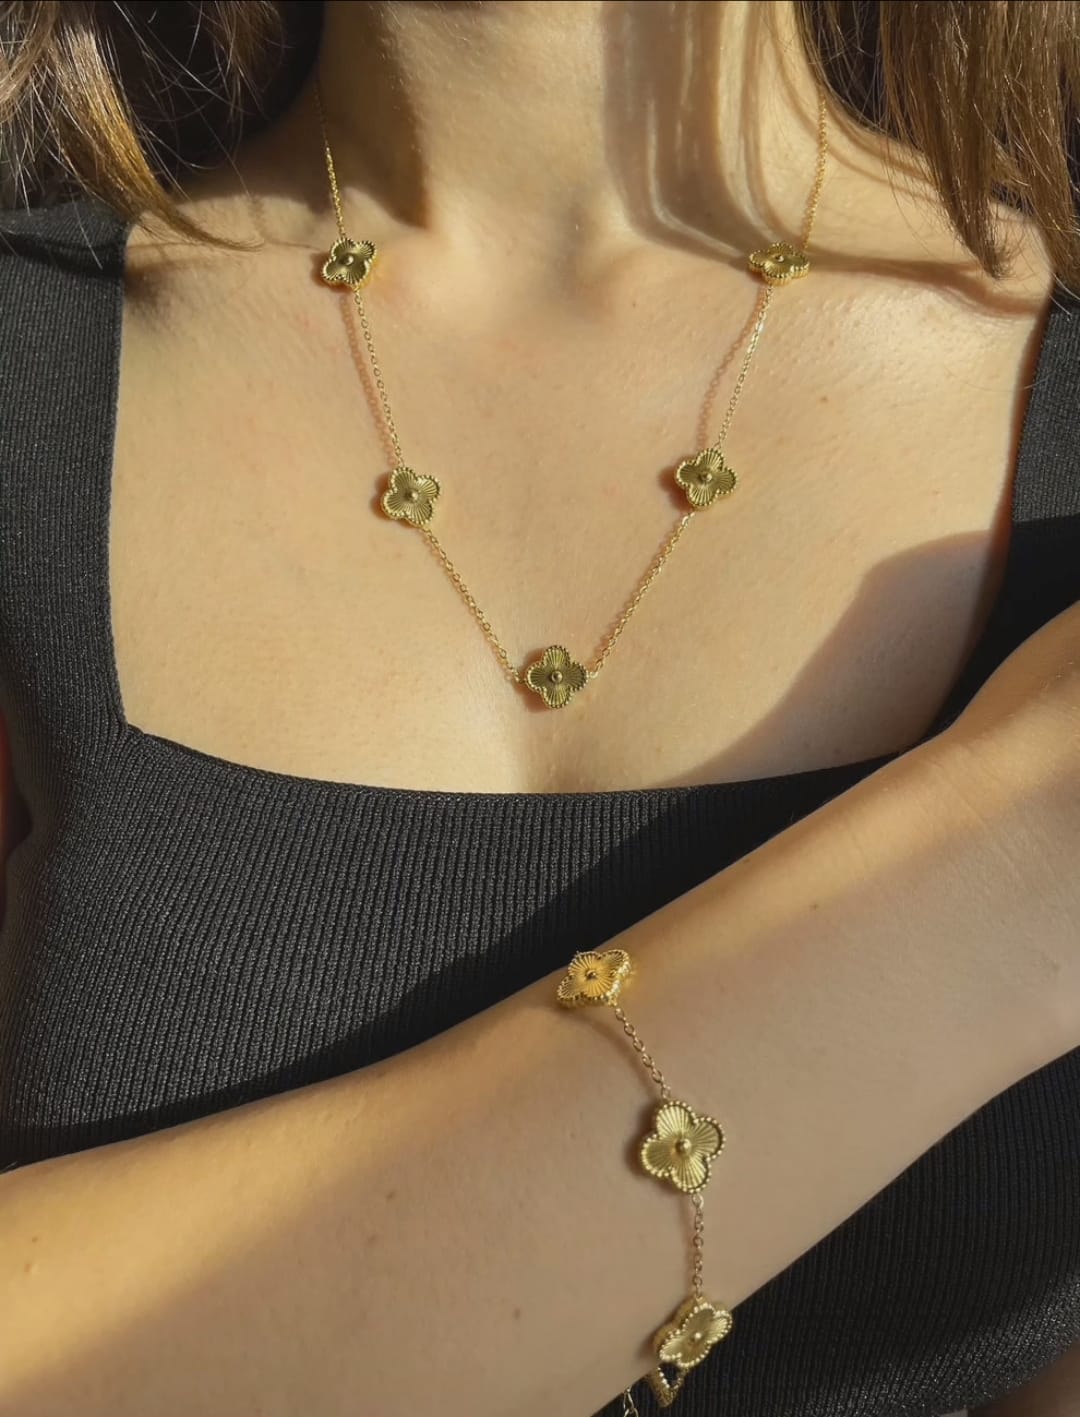 Clover Necklace and Bracelet Combo